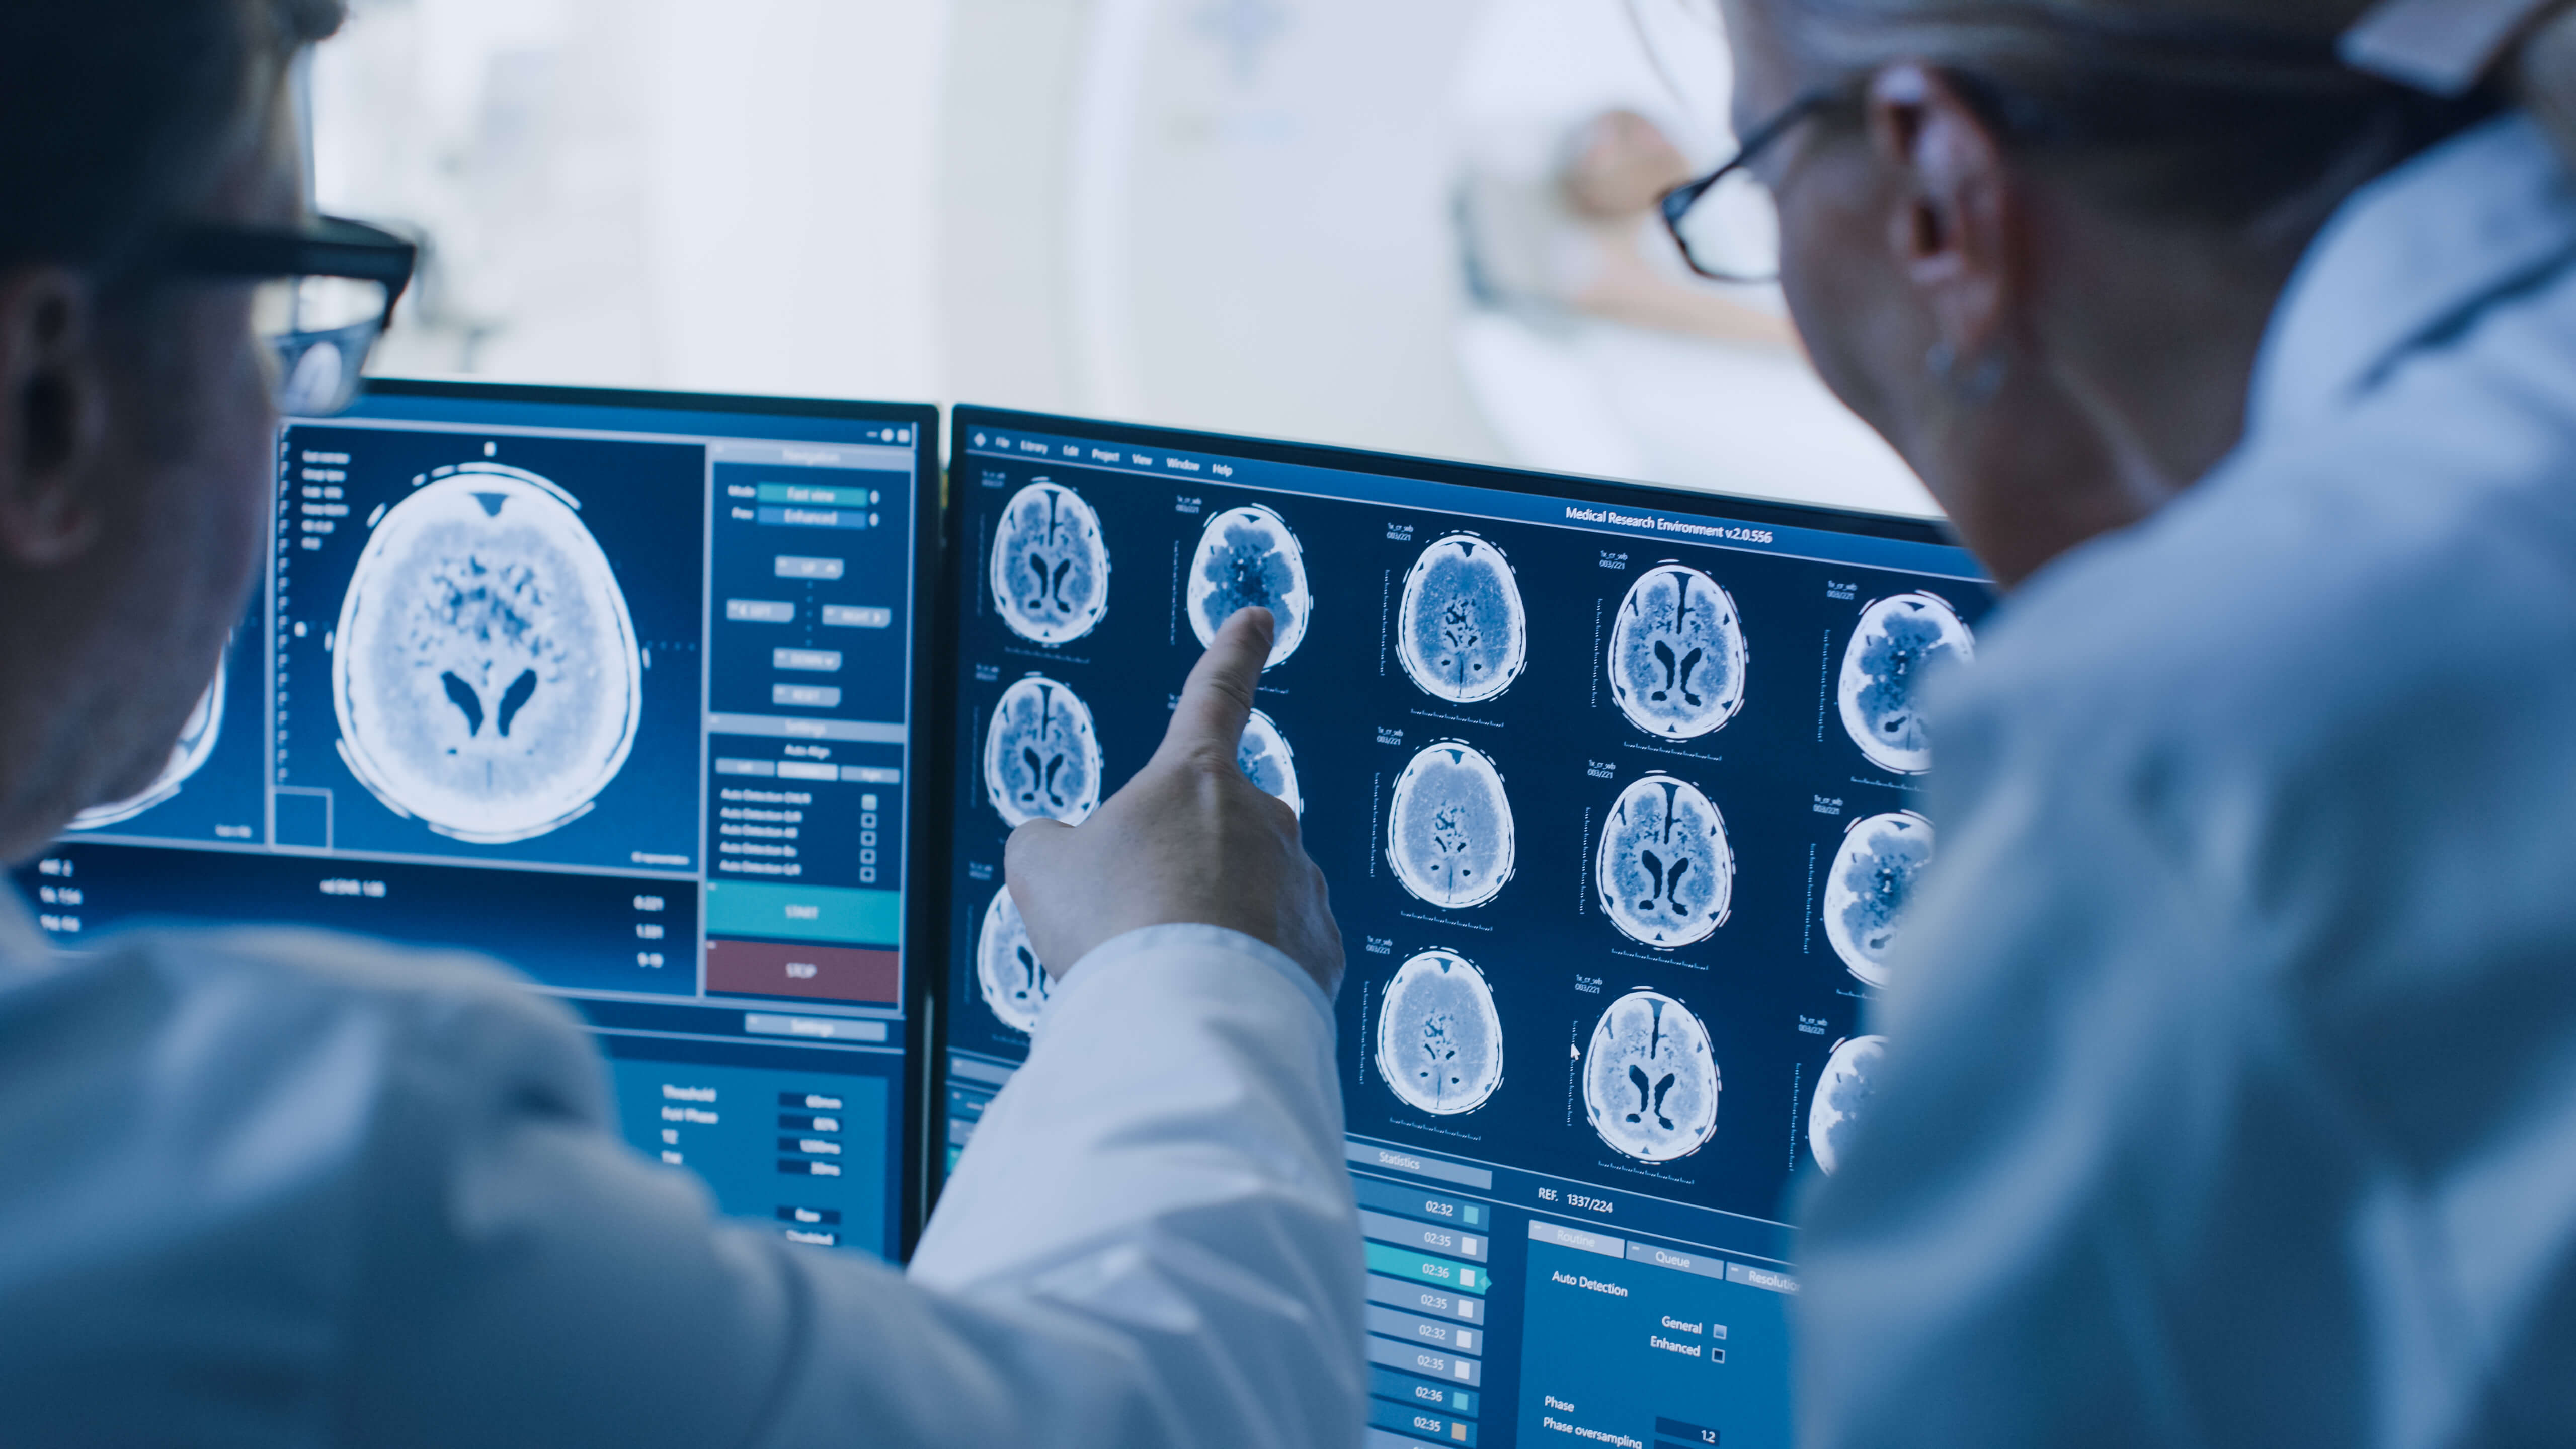 Healthcare professionals using imaging analytics software, or software as a medical device (SaMD), to analyze CT scan data.